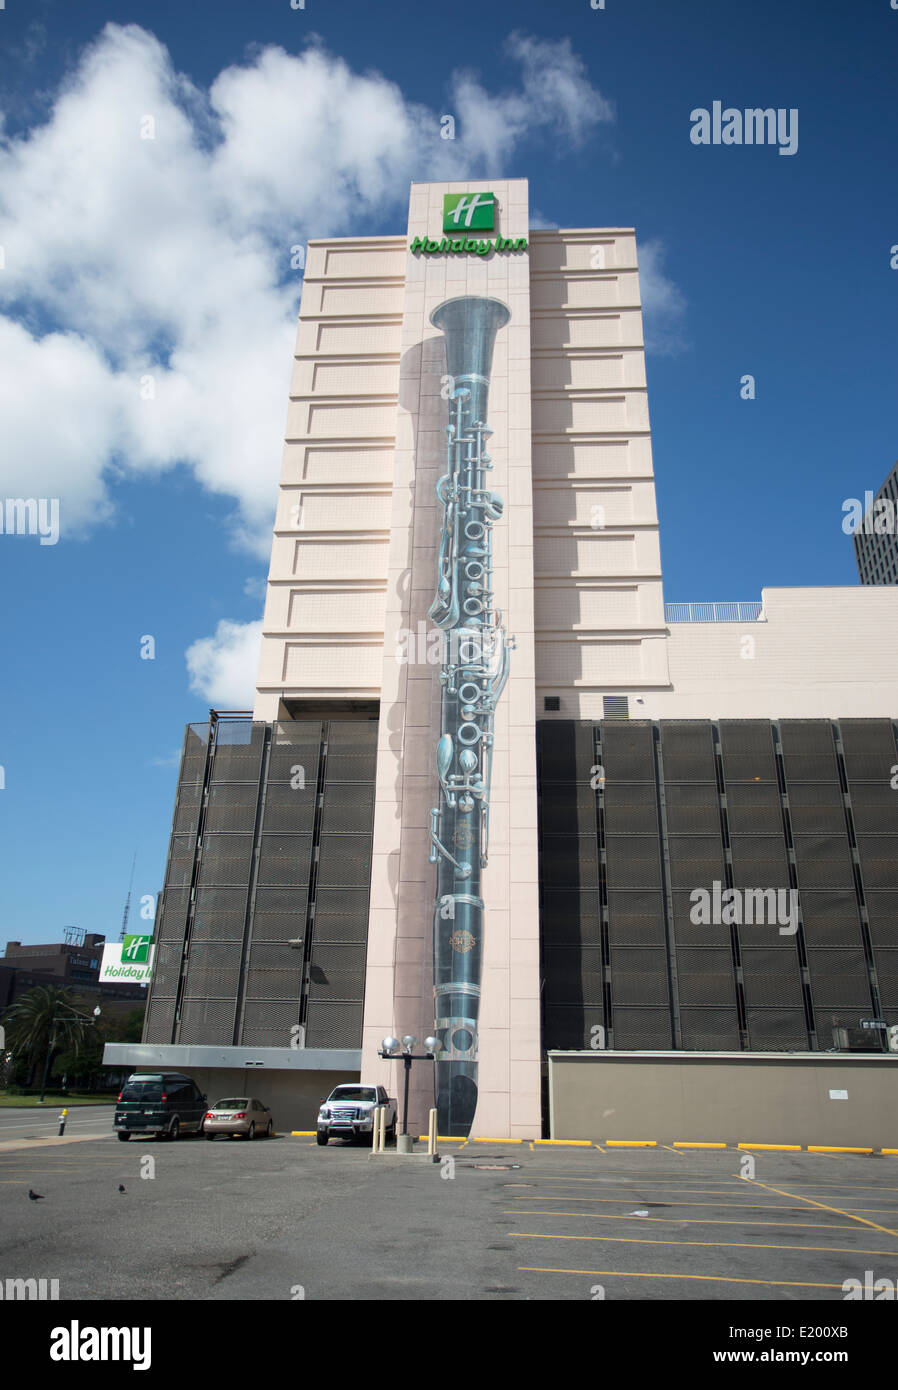 A large mural of a clarinet painted on the side of a Holiday Inn in New Orleans. Stock Photo